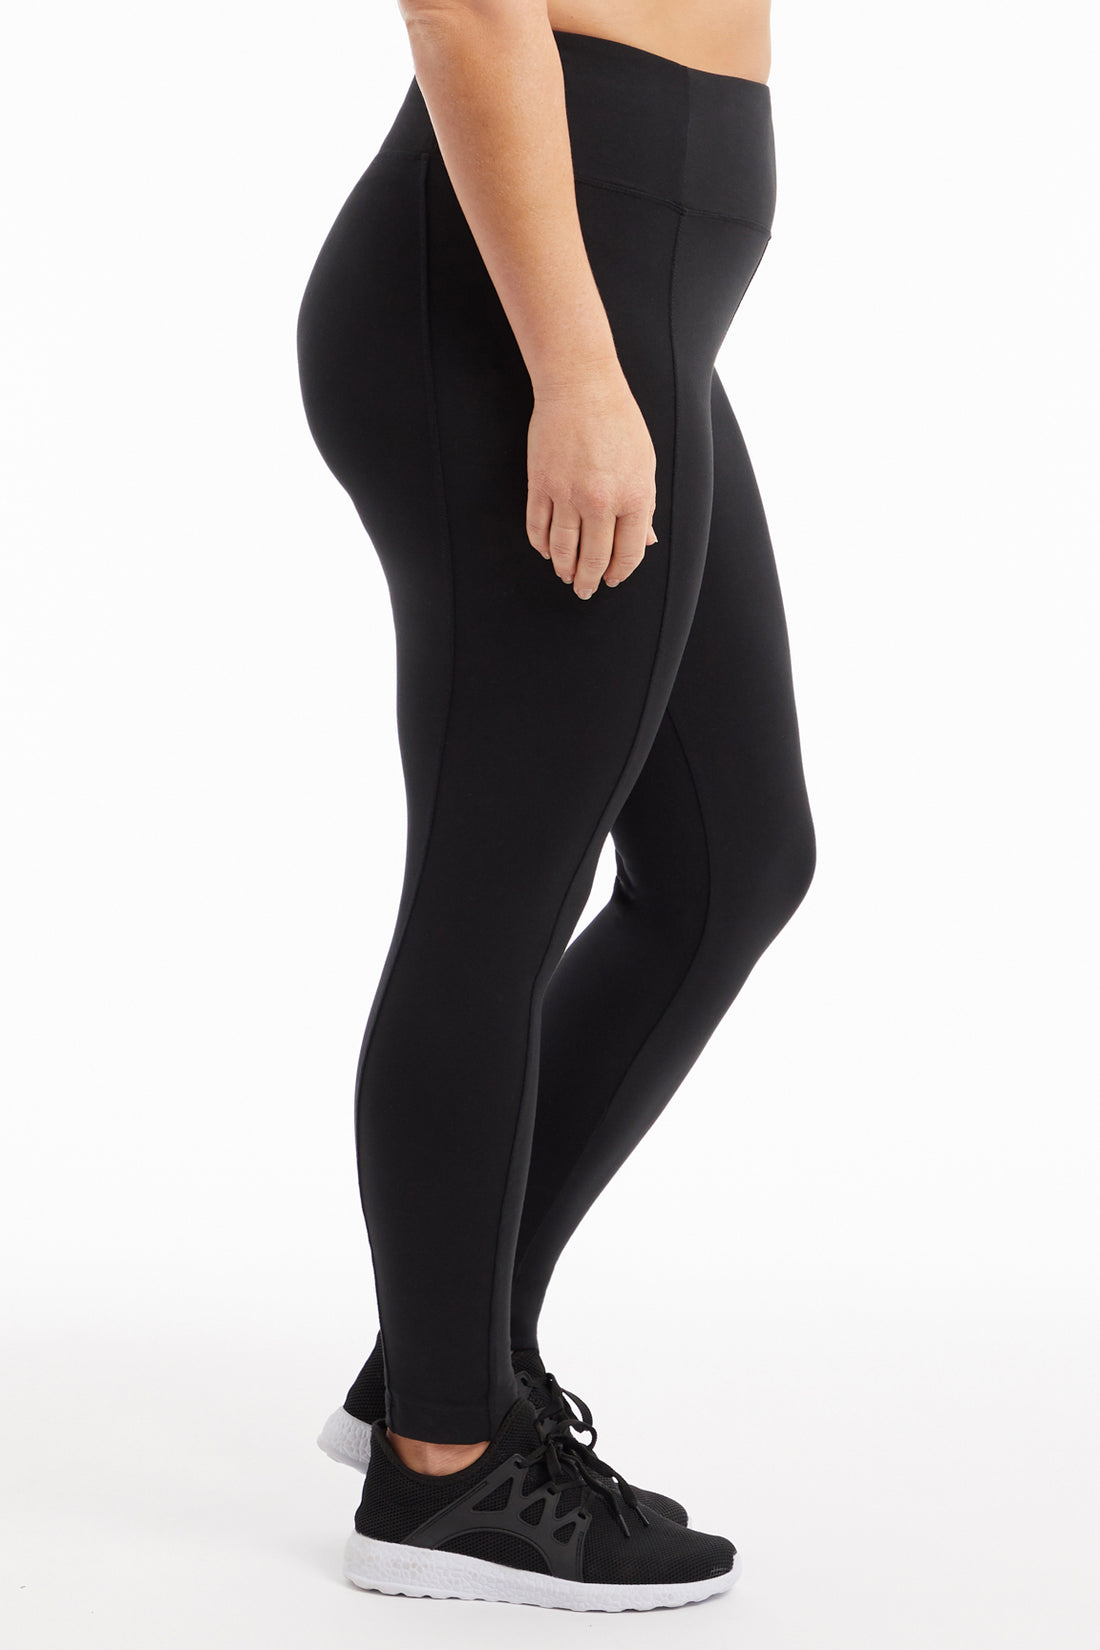 Marika Women's Plus Size Carrie Tummy Control Pant, Black, 3X at   Women's Clothing store